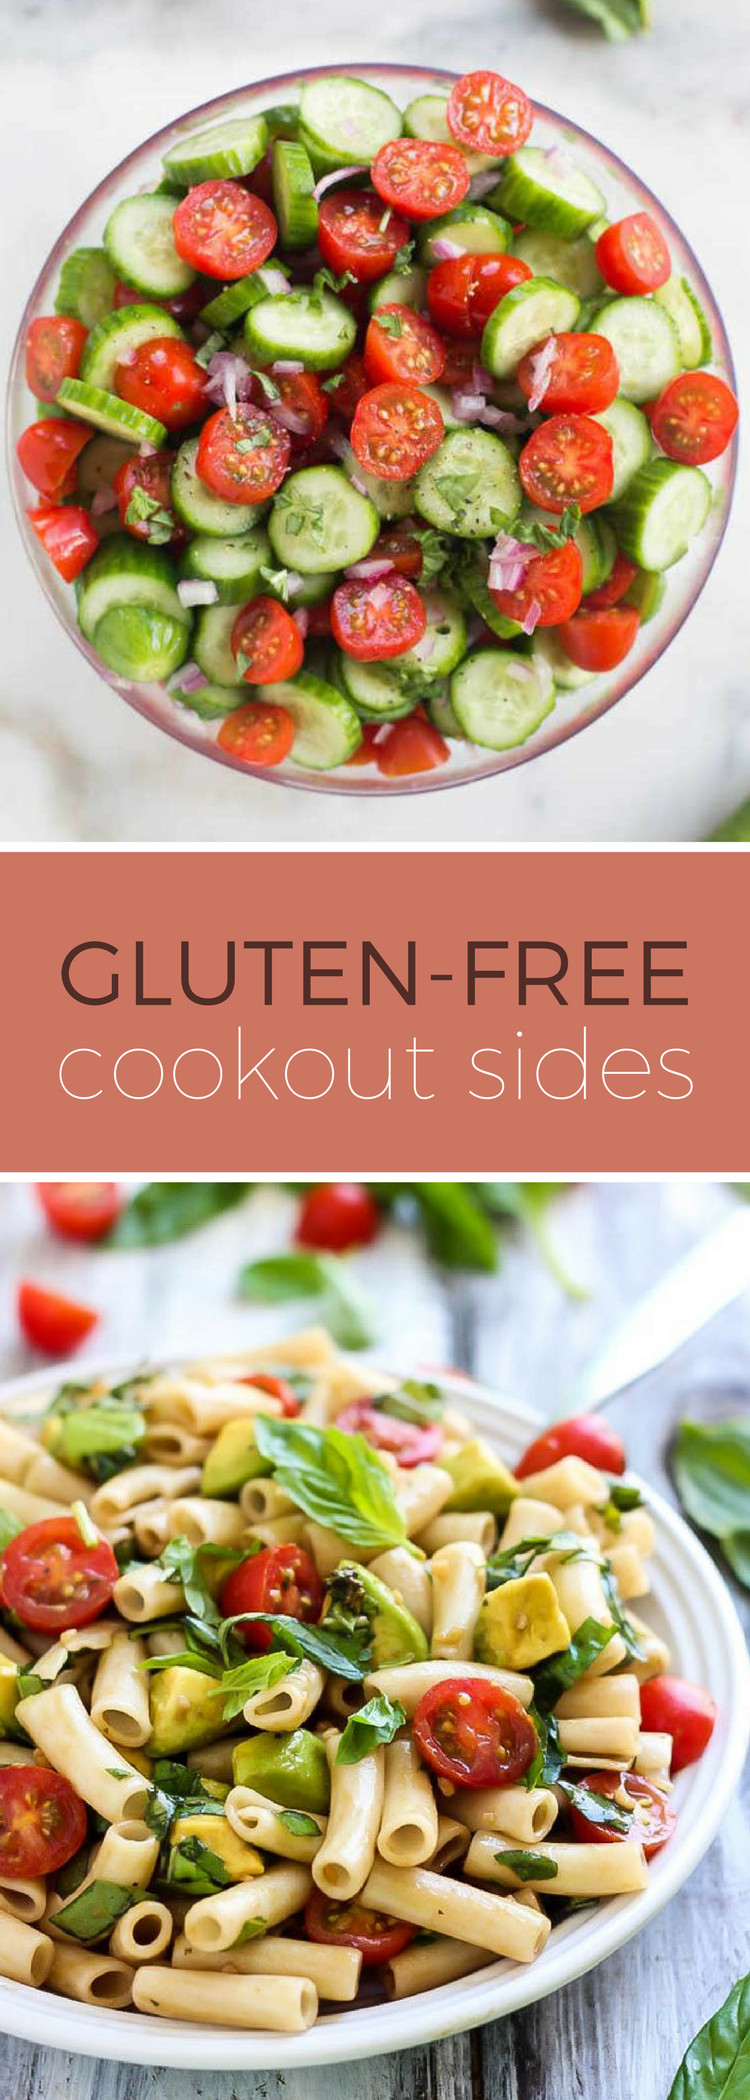 Gluten Free Side Dishes Summer
 10 Gluten Free Side Dishes for Your Summer Cookout Circuit